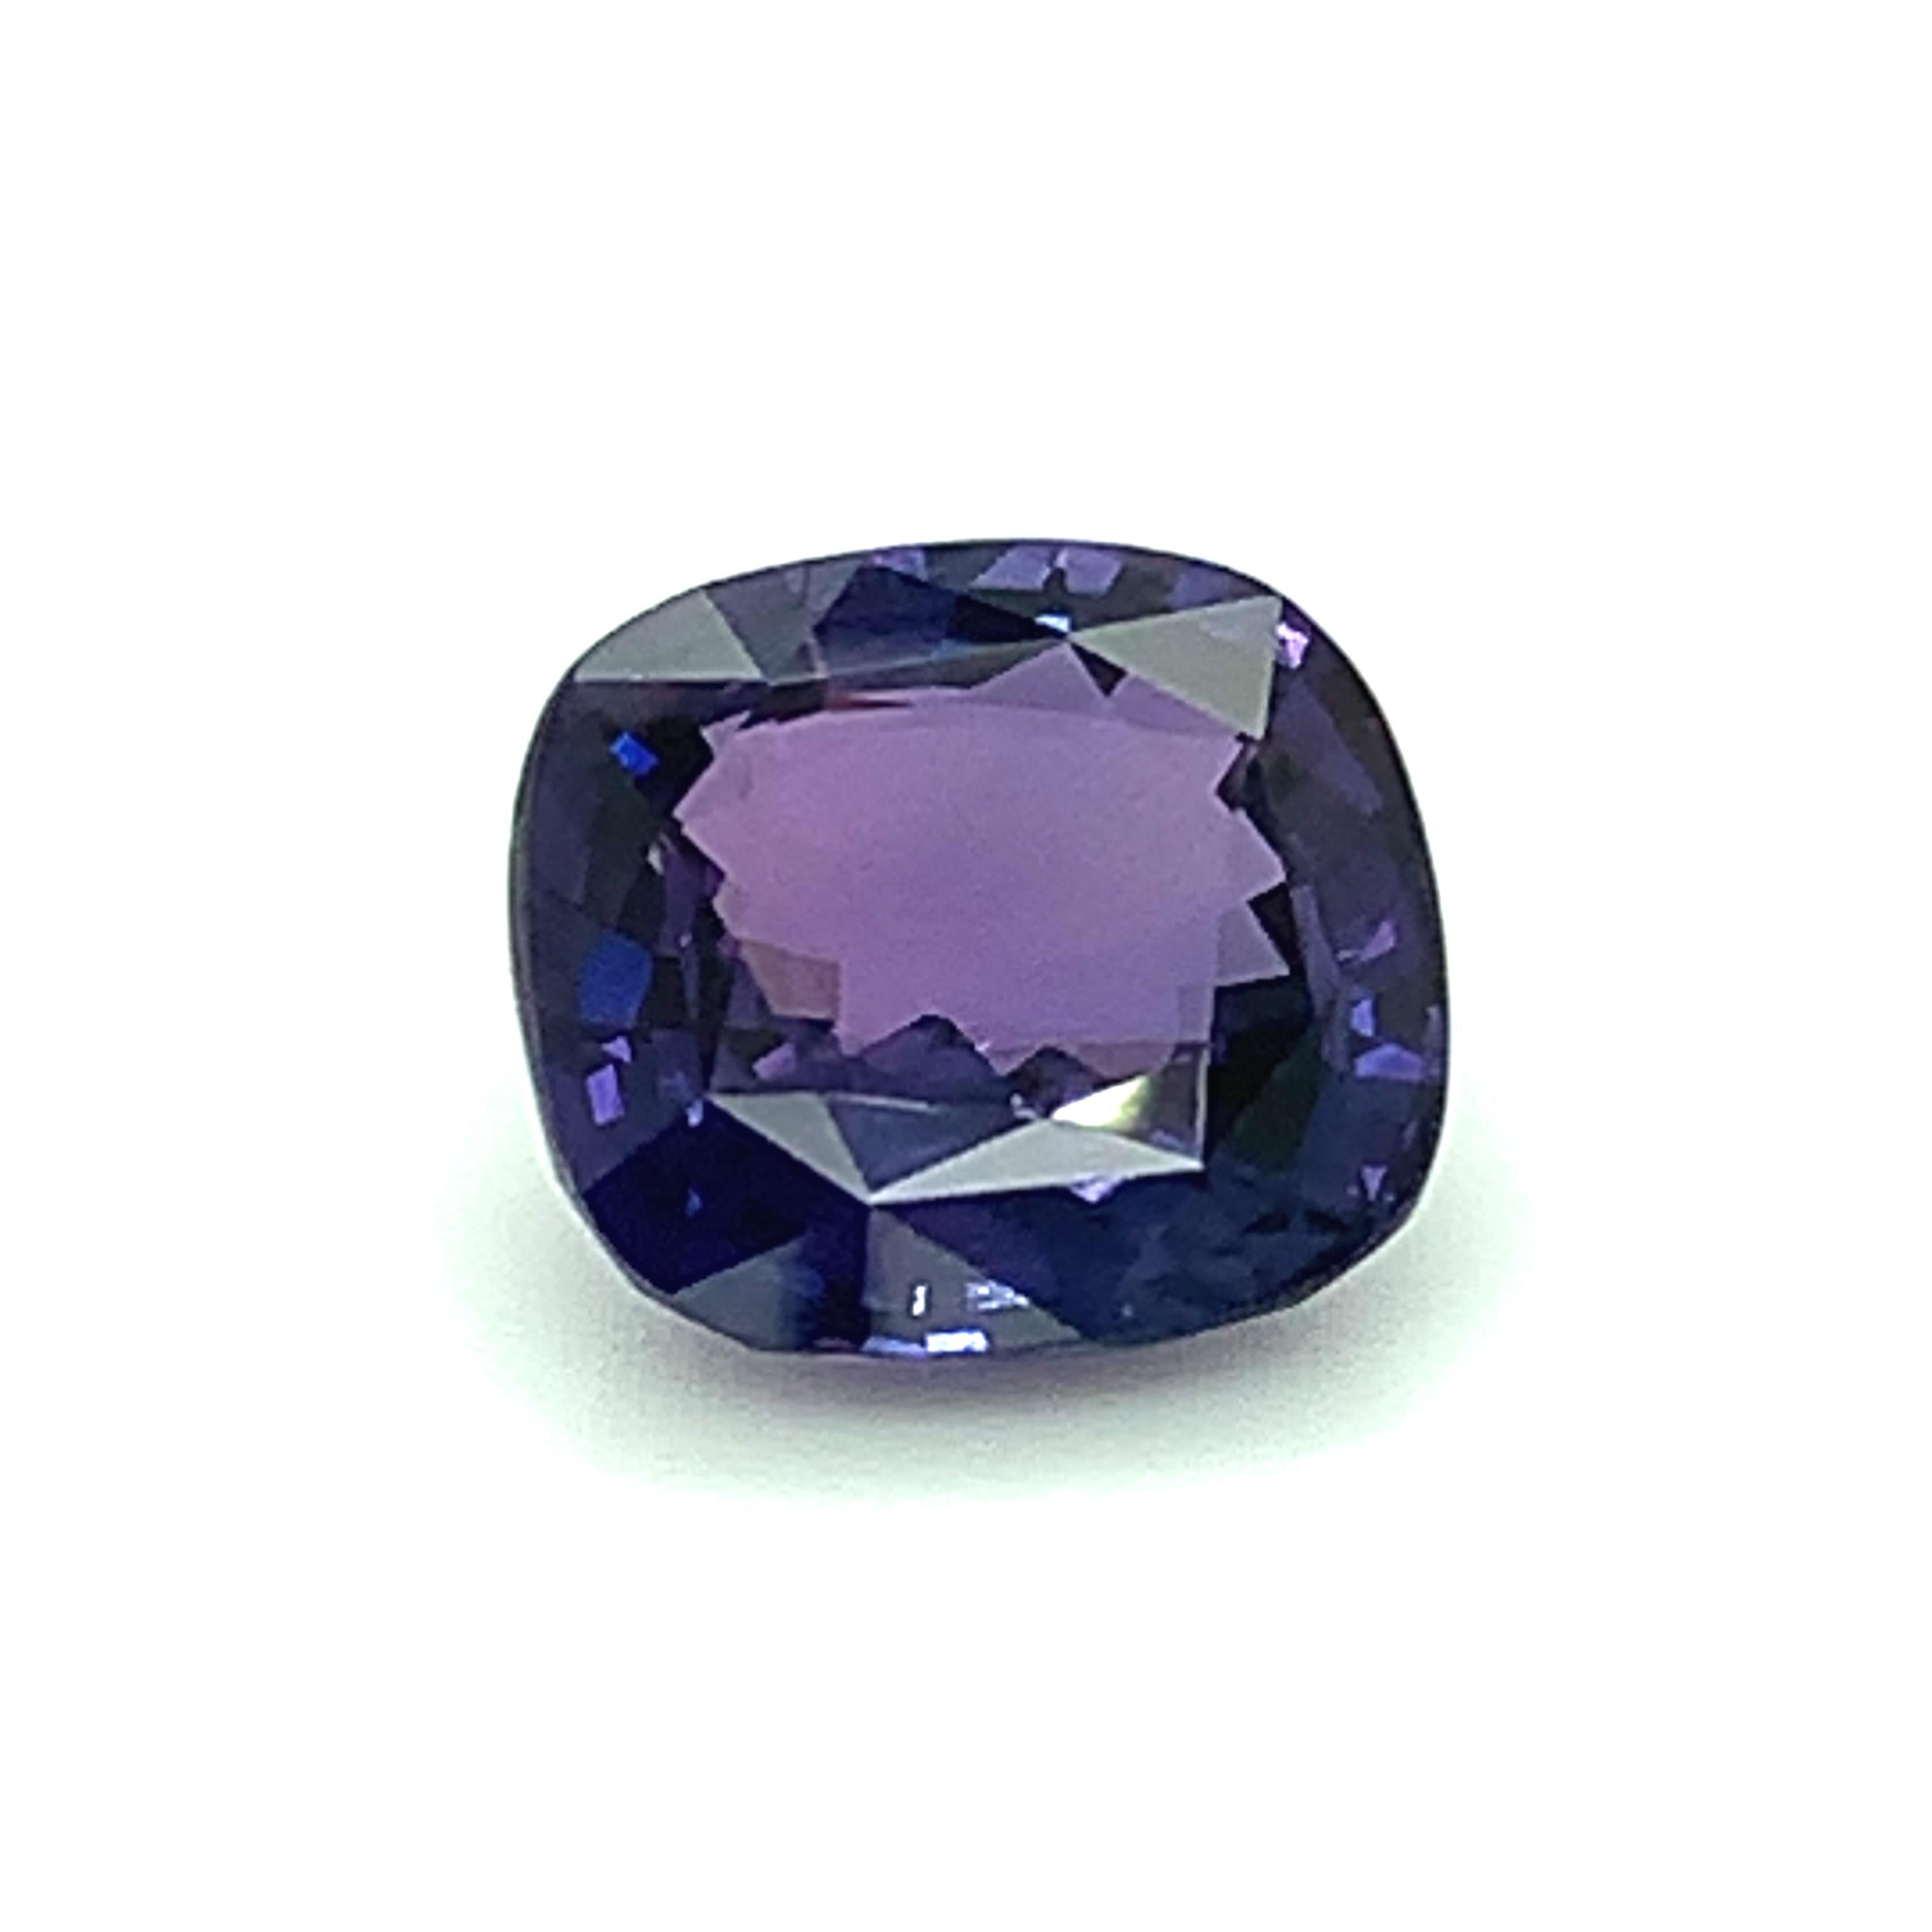 6.76 Carat Color Change Sapphire Cushion, Unset Loose Gemstone, GIA Certified 6